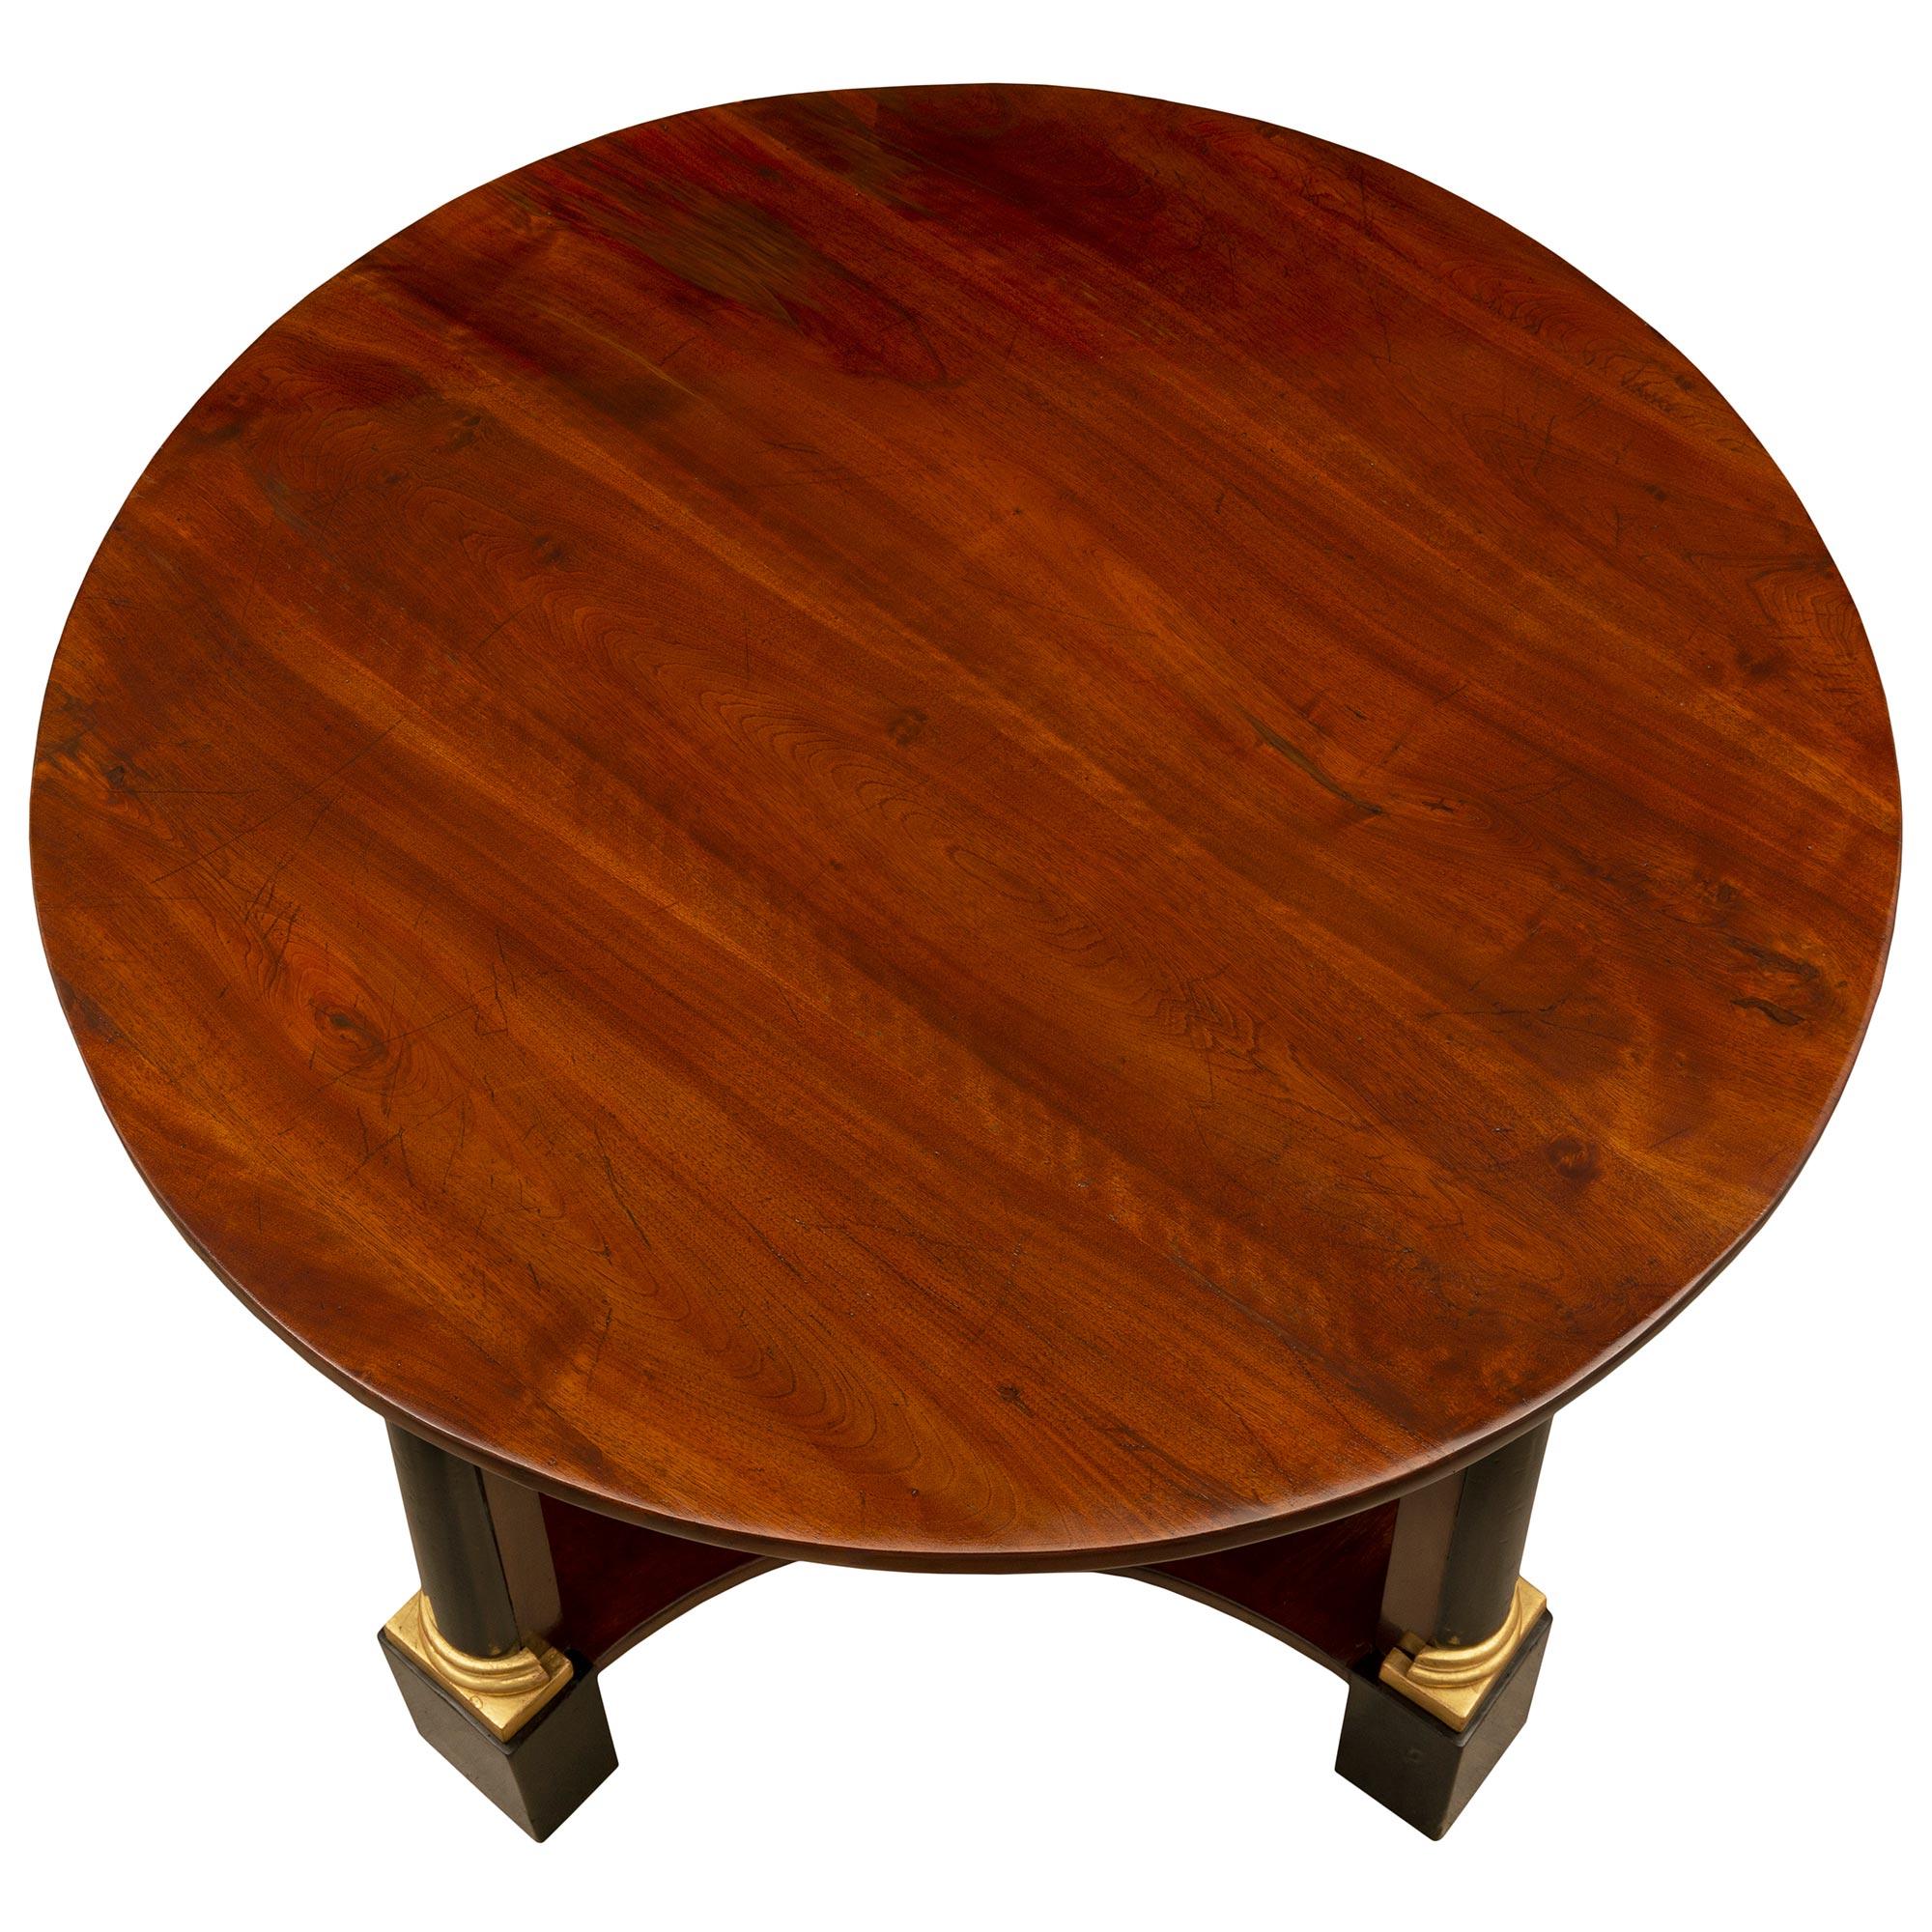 A handsome Italian 19th century Neo-Classical st. Mahogany, ebonized Fruitwood, and giltwood center table. The circular center table is raised by striking ebonized Fruitwood block feet below impressive column supports with mottled giltwood plinths